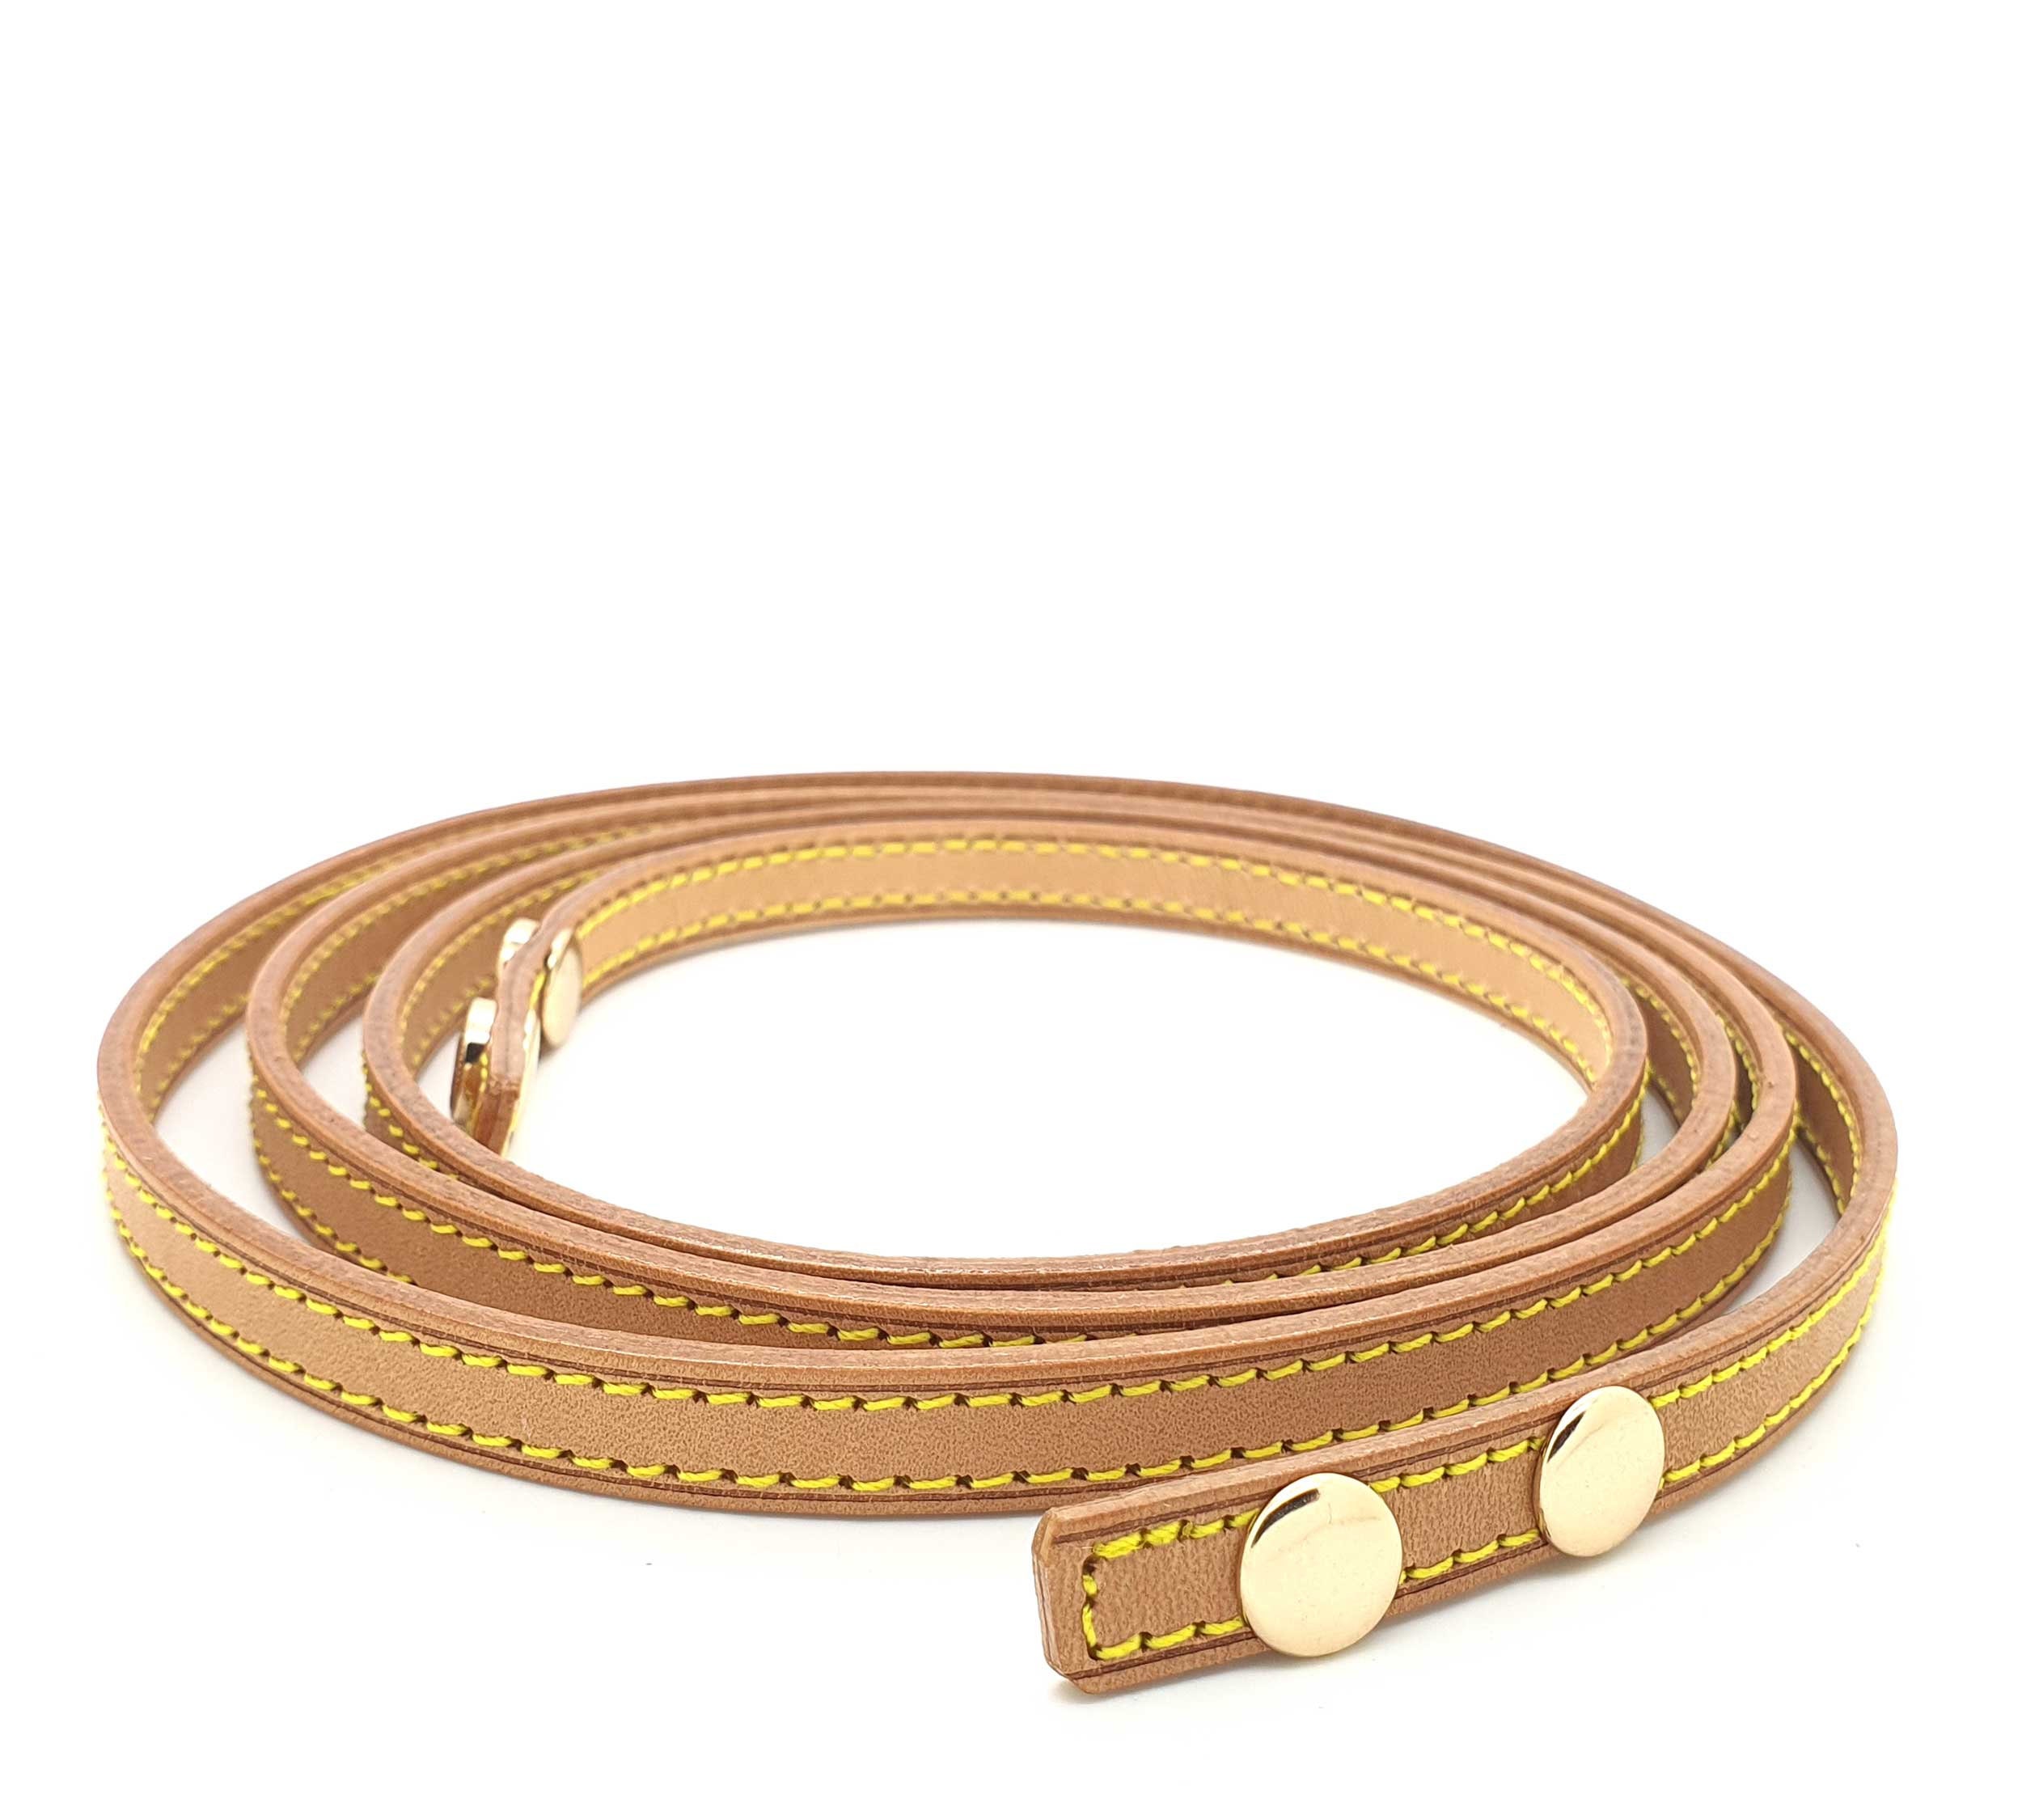 Elevate your fashion game with the Louis Vuitton Florentine belt